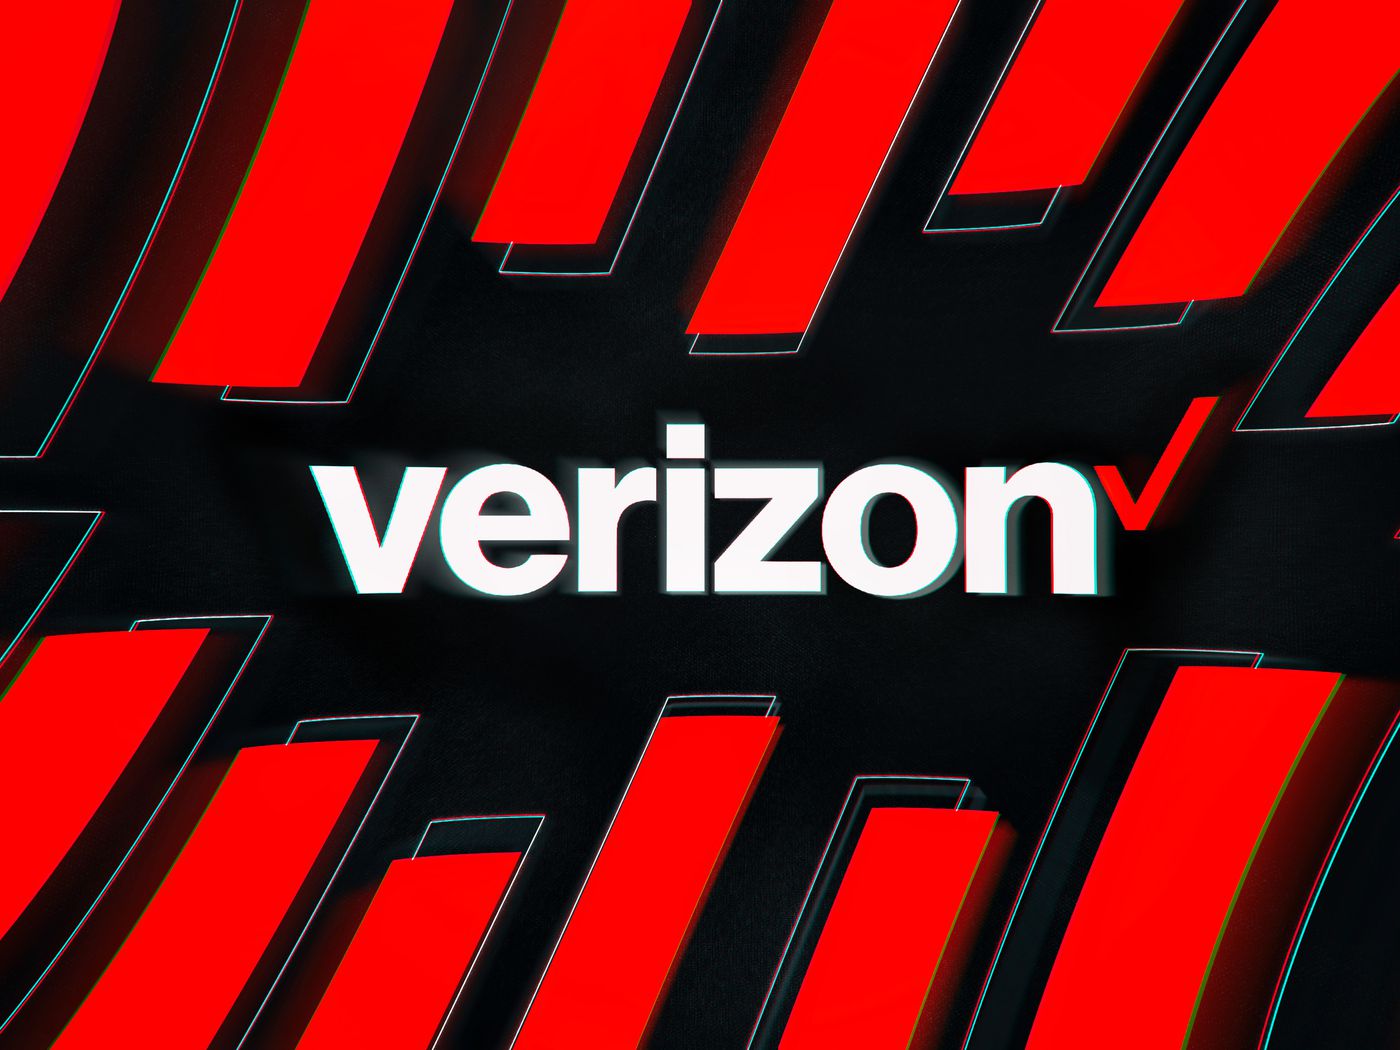 Verizon Customers to Apply for a Refund as Part of a $100 Million Settlement Till Monday